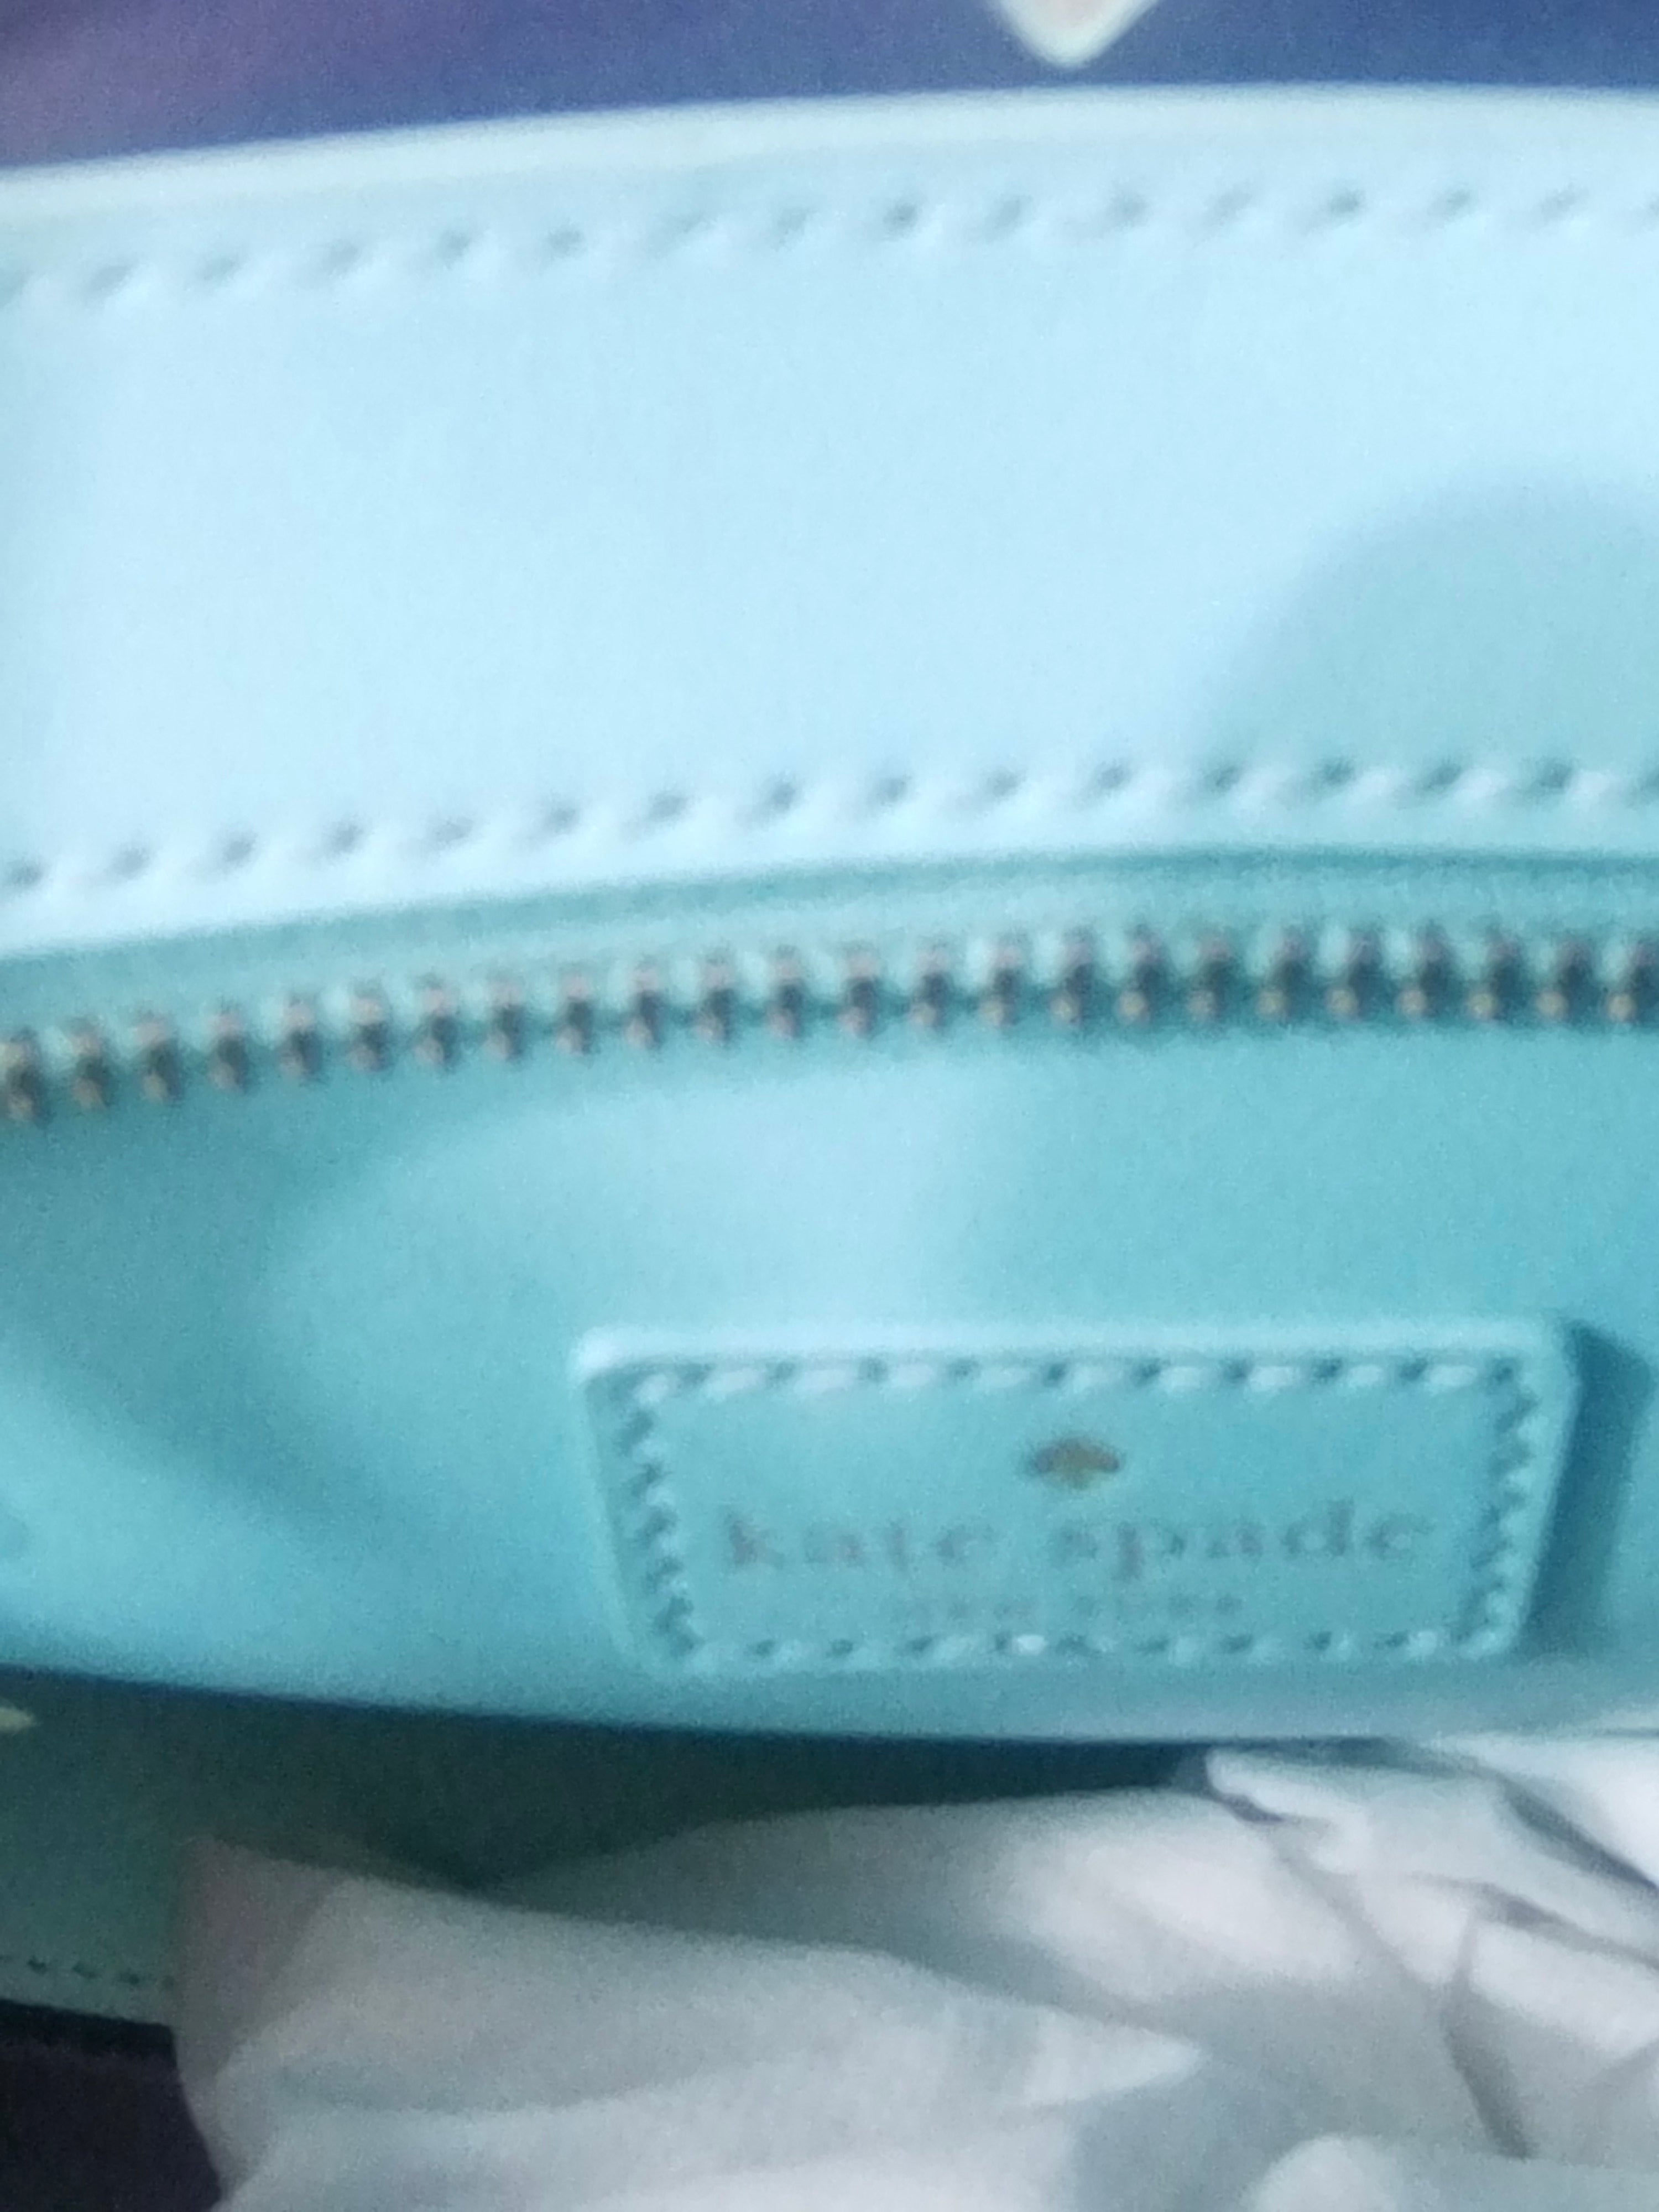 New Kate Spade Rosie Leather Flap Camera bag Crossbody Turquoise with Dust  bag | eBay